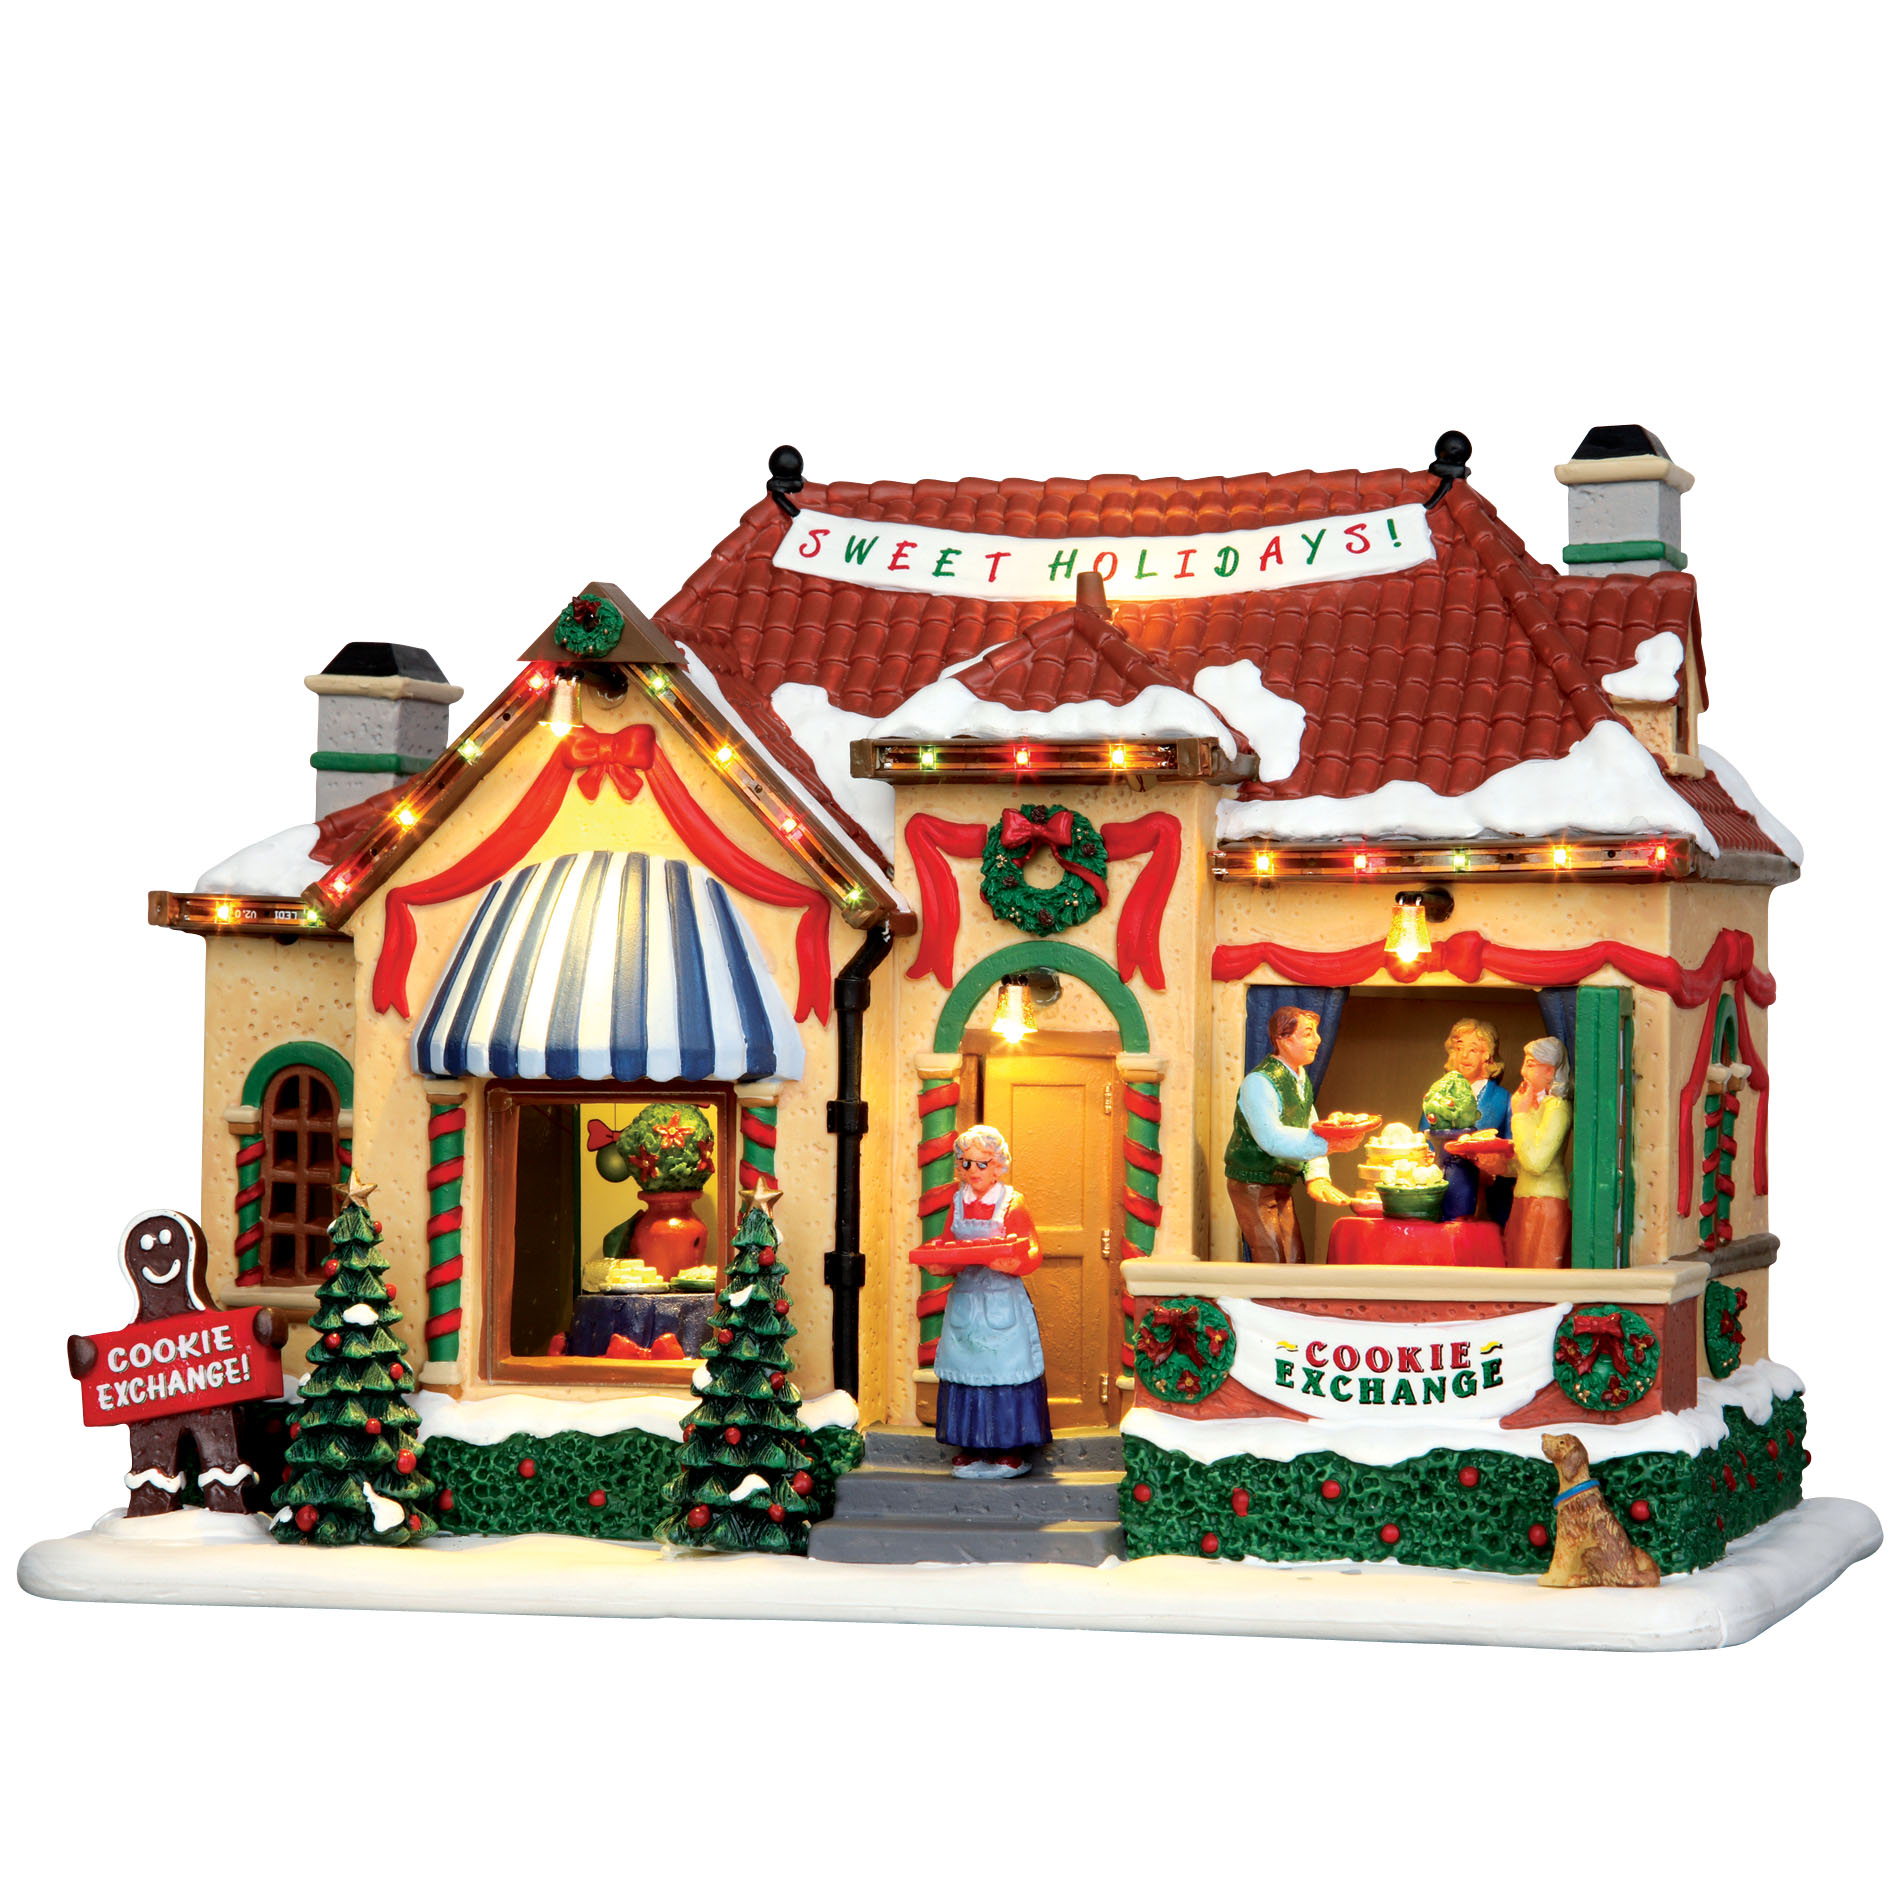 Lemax Village Collection Christmas Village Building, Cookie Exchange Party, With 4.5V Adaptor